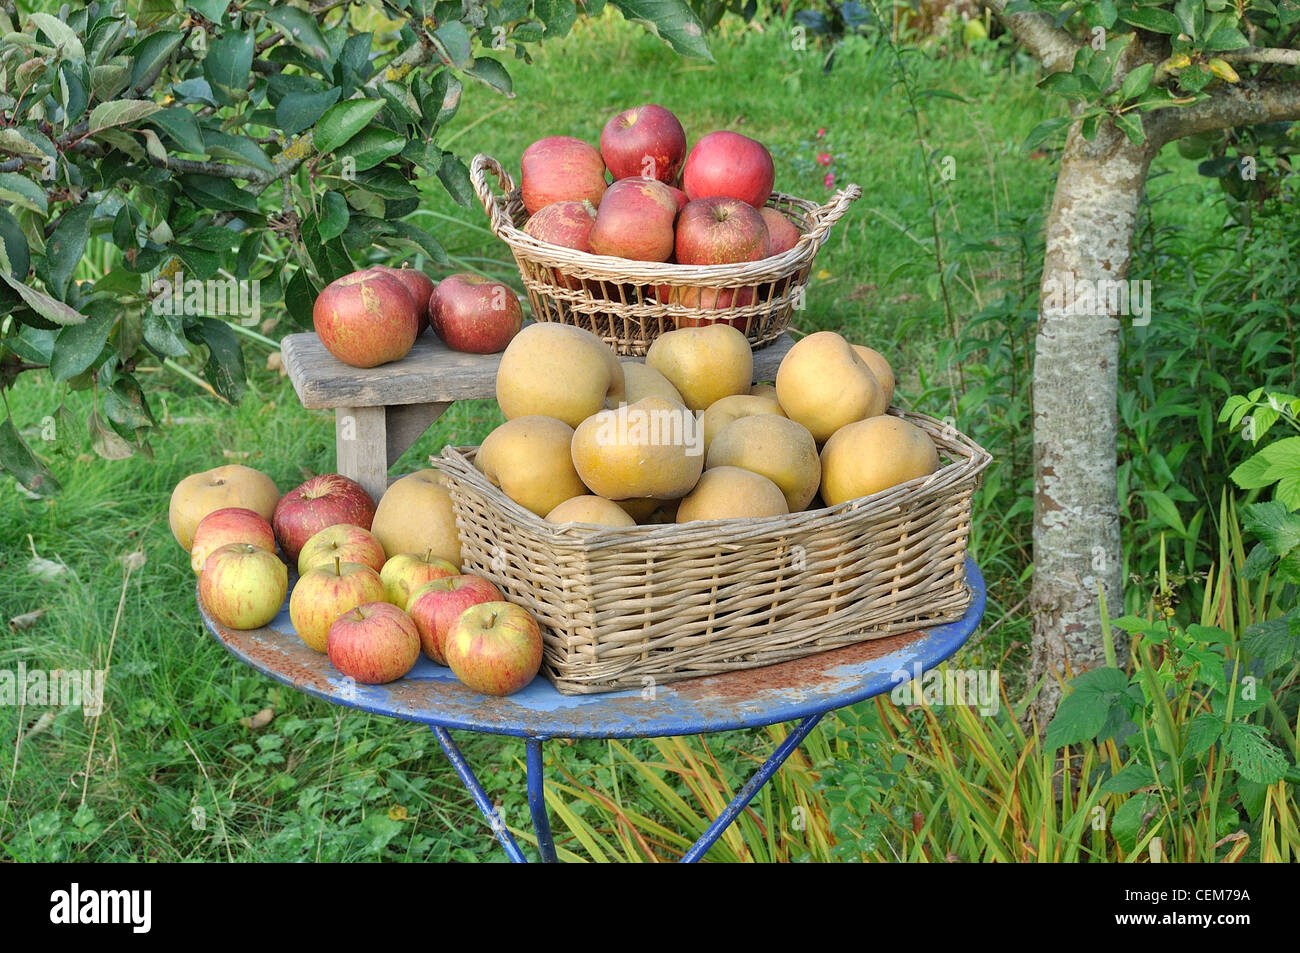 Apples of the garden : Russet apples and Melrose apples (Malus domestica). Stock Photo